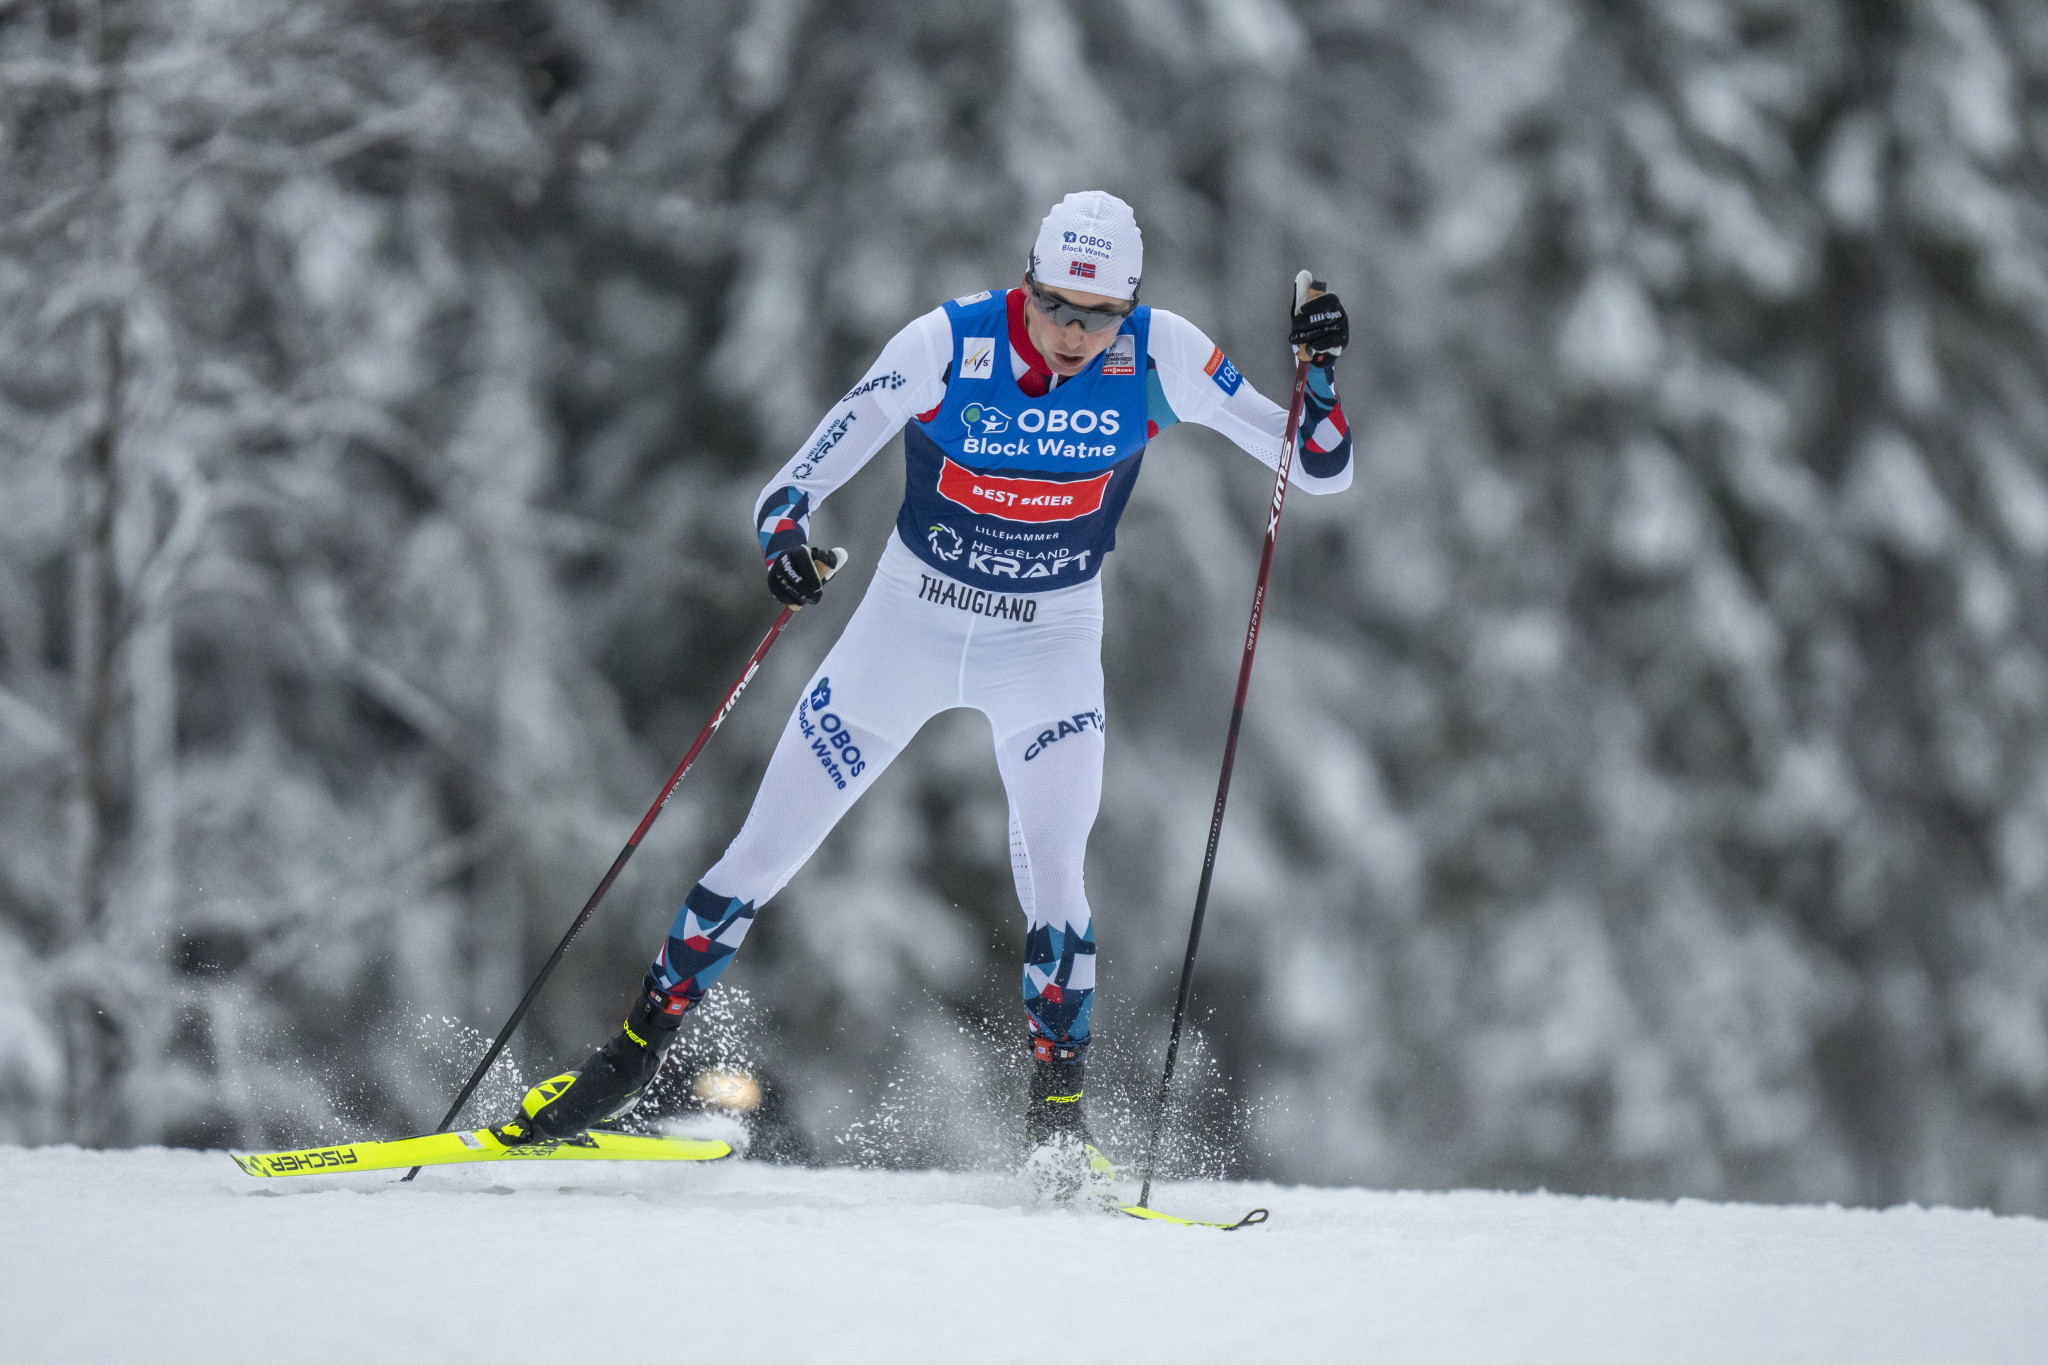 Norway's Jarl Magnus Riiber leads the men's Nordic Combined World Cup overall standings ©Getty Images